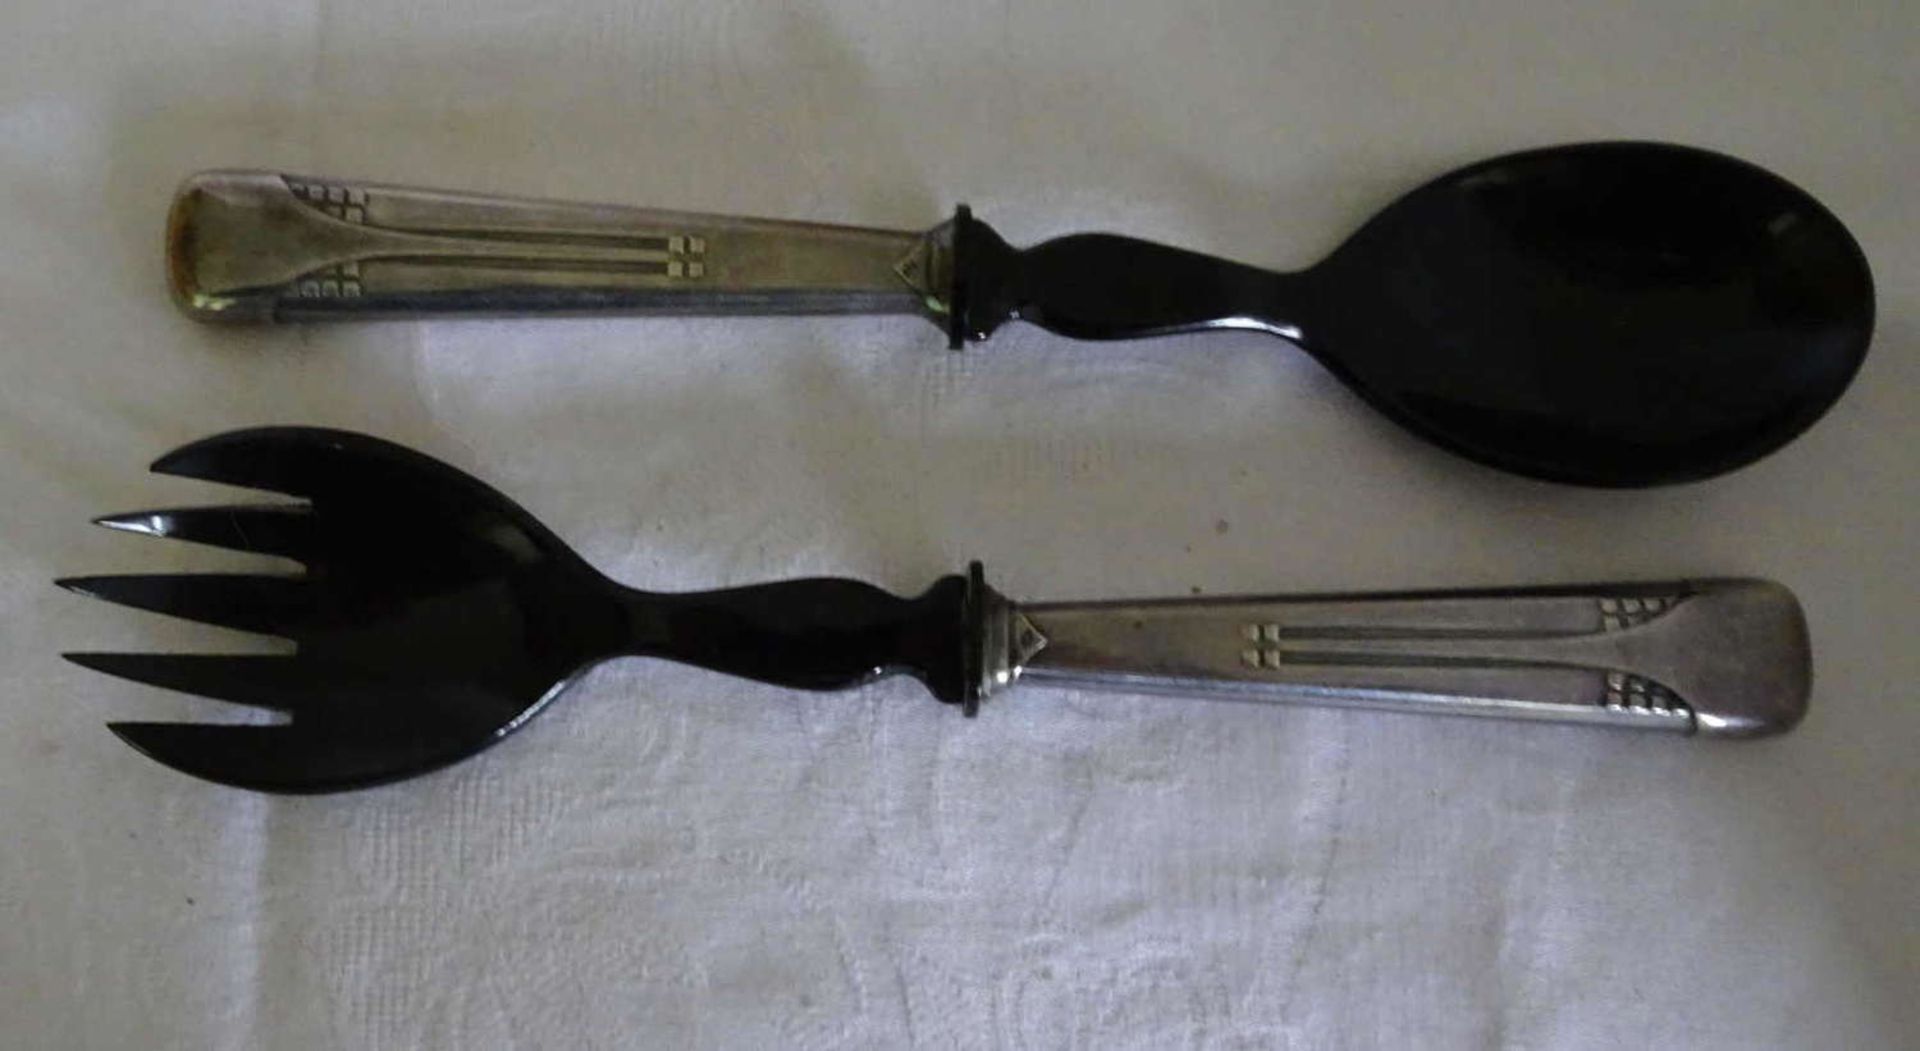 WMF Art Nouveau salad servers, hallmarked I / O. Horn cutlery with silver-plated handles. Very